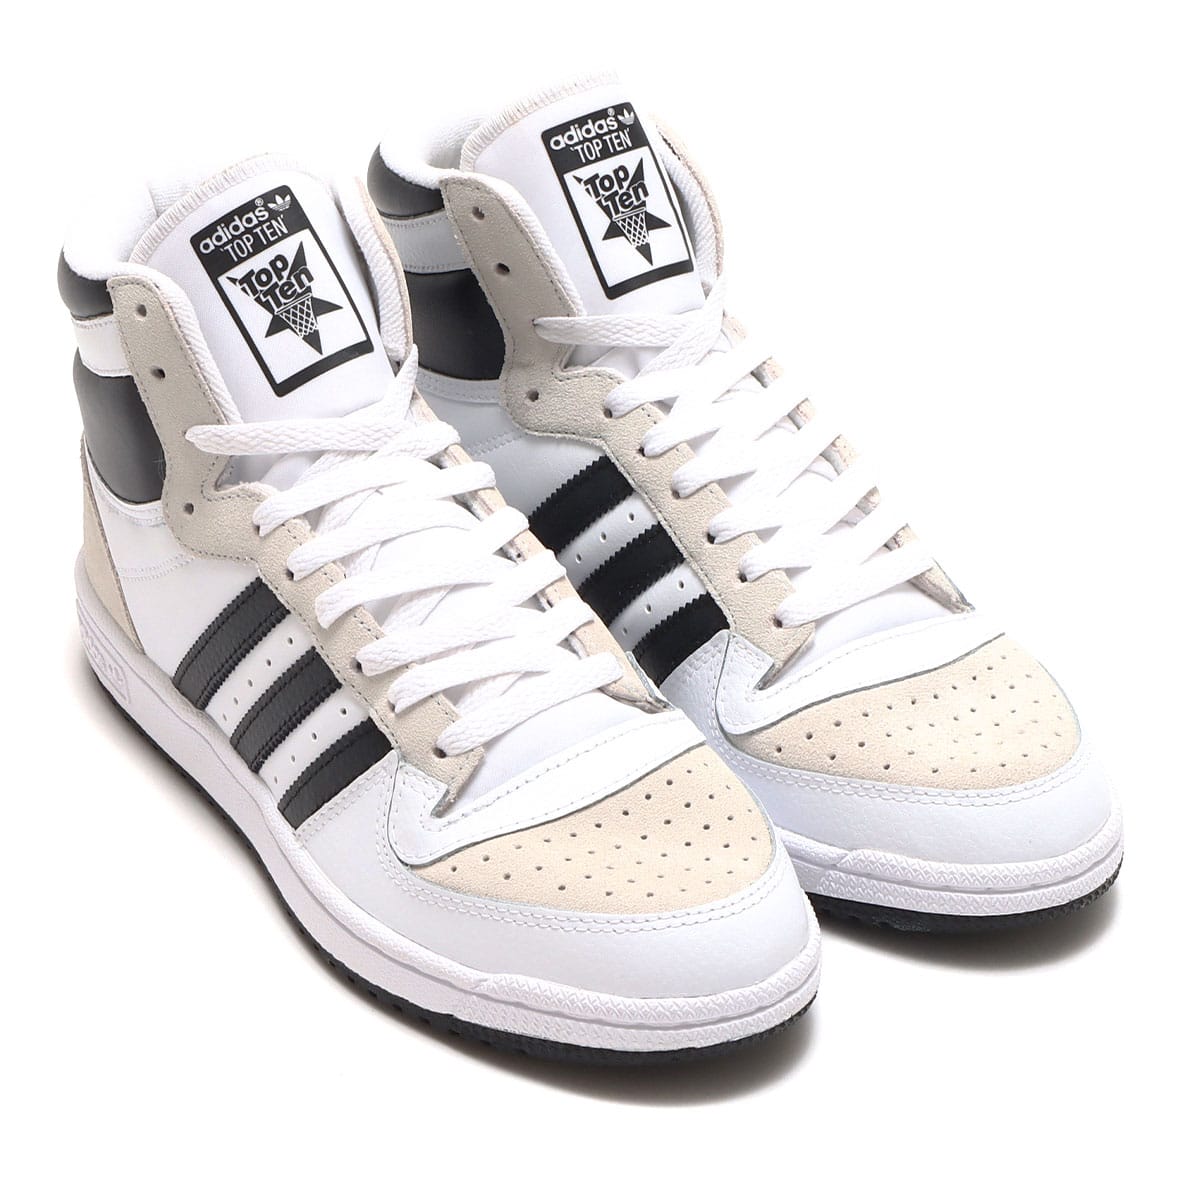 adidas TOP TEN RB FOOTWEAR WHITE/CRYSTAL WHITE/CORE BLACK 23SS-I_photo_large